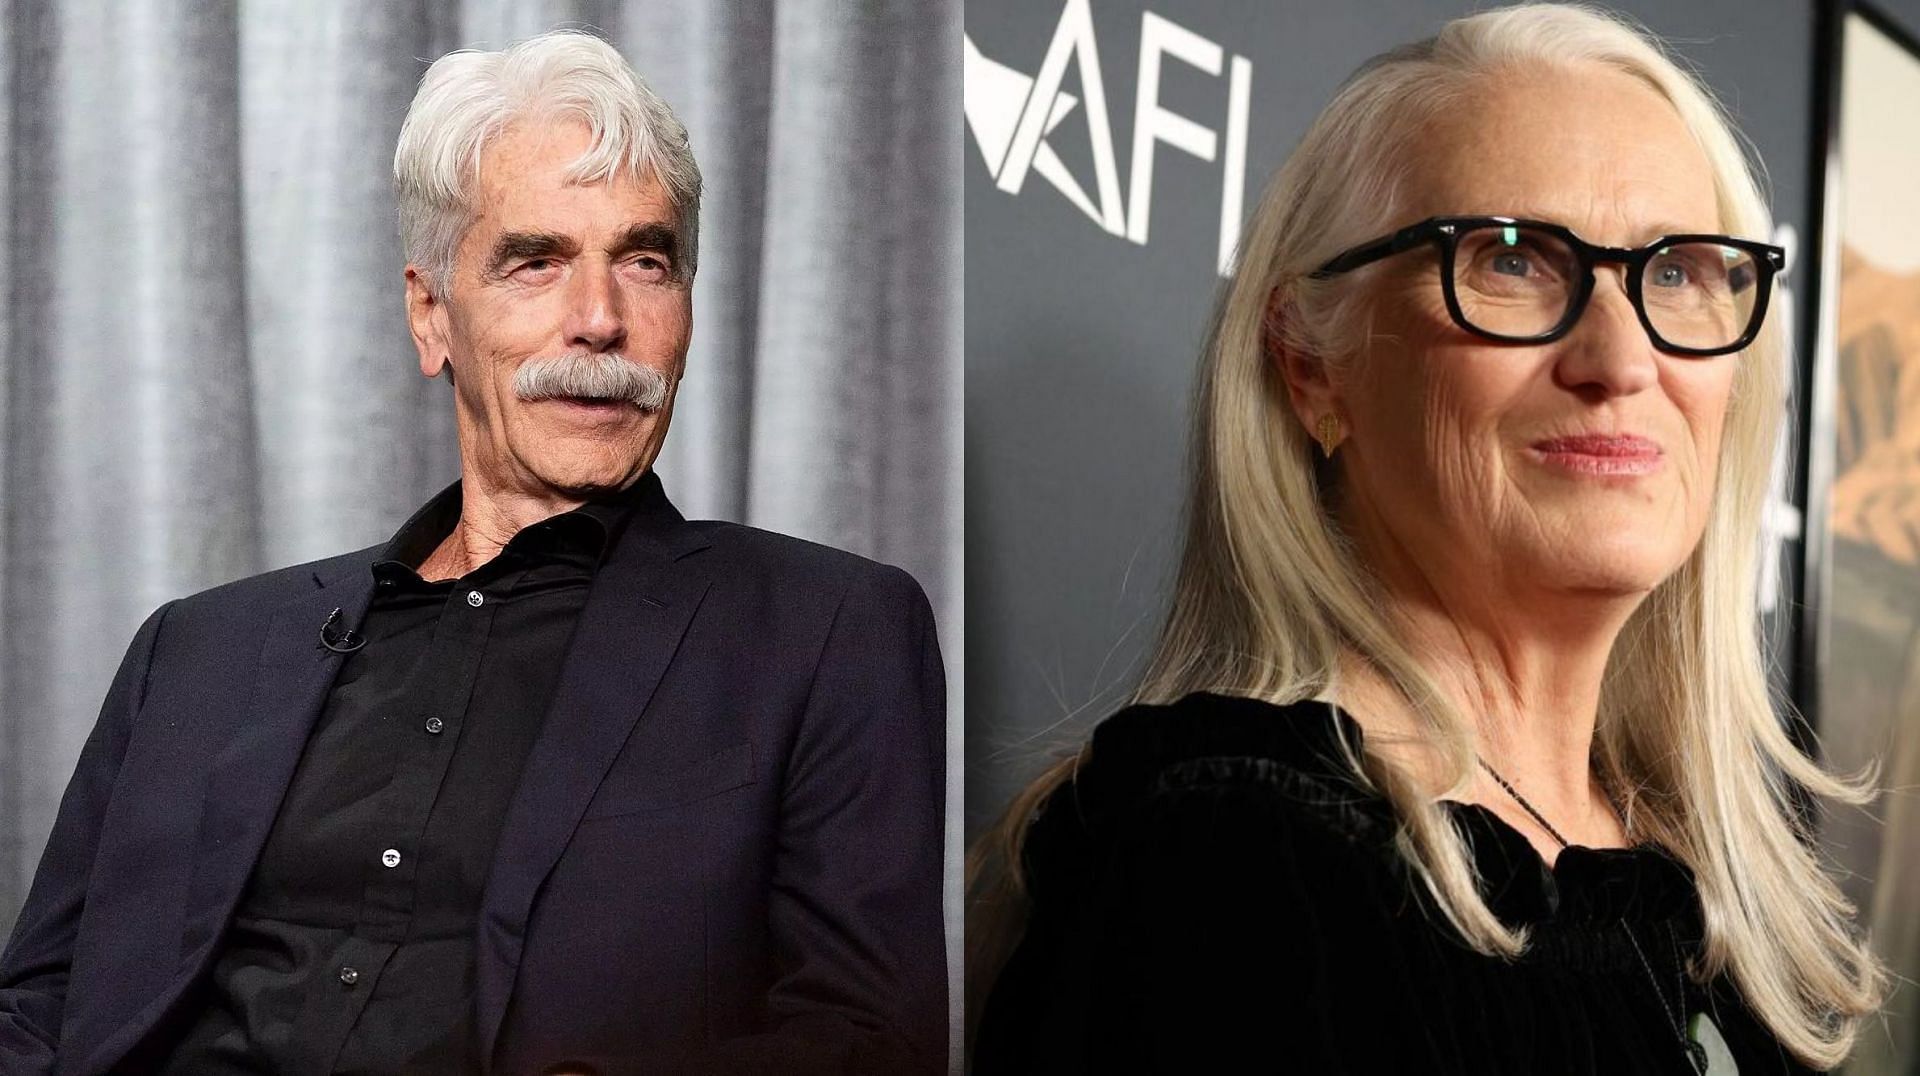 The Power of the Dog director Jane Campion has responded to Sam Elliott&#039;s harsh comments about her film (Image via Vincent Sandoval/Getty Images, and Rich Fury/Getty Images)